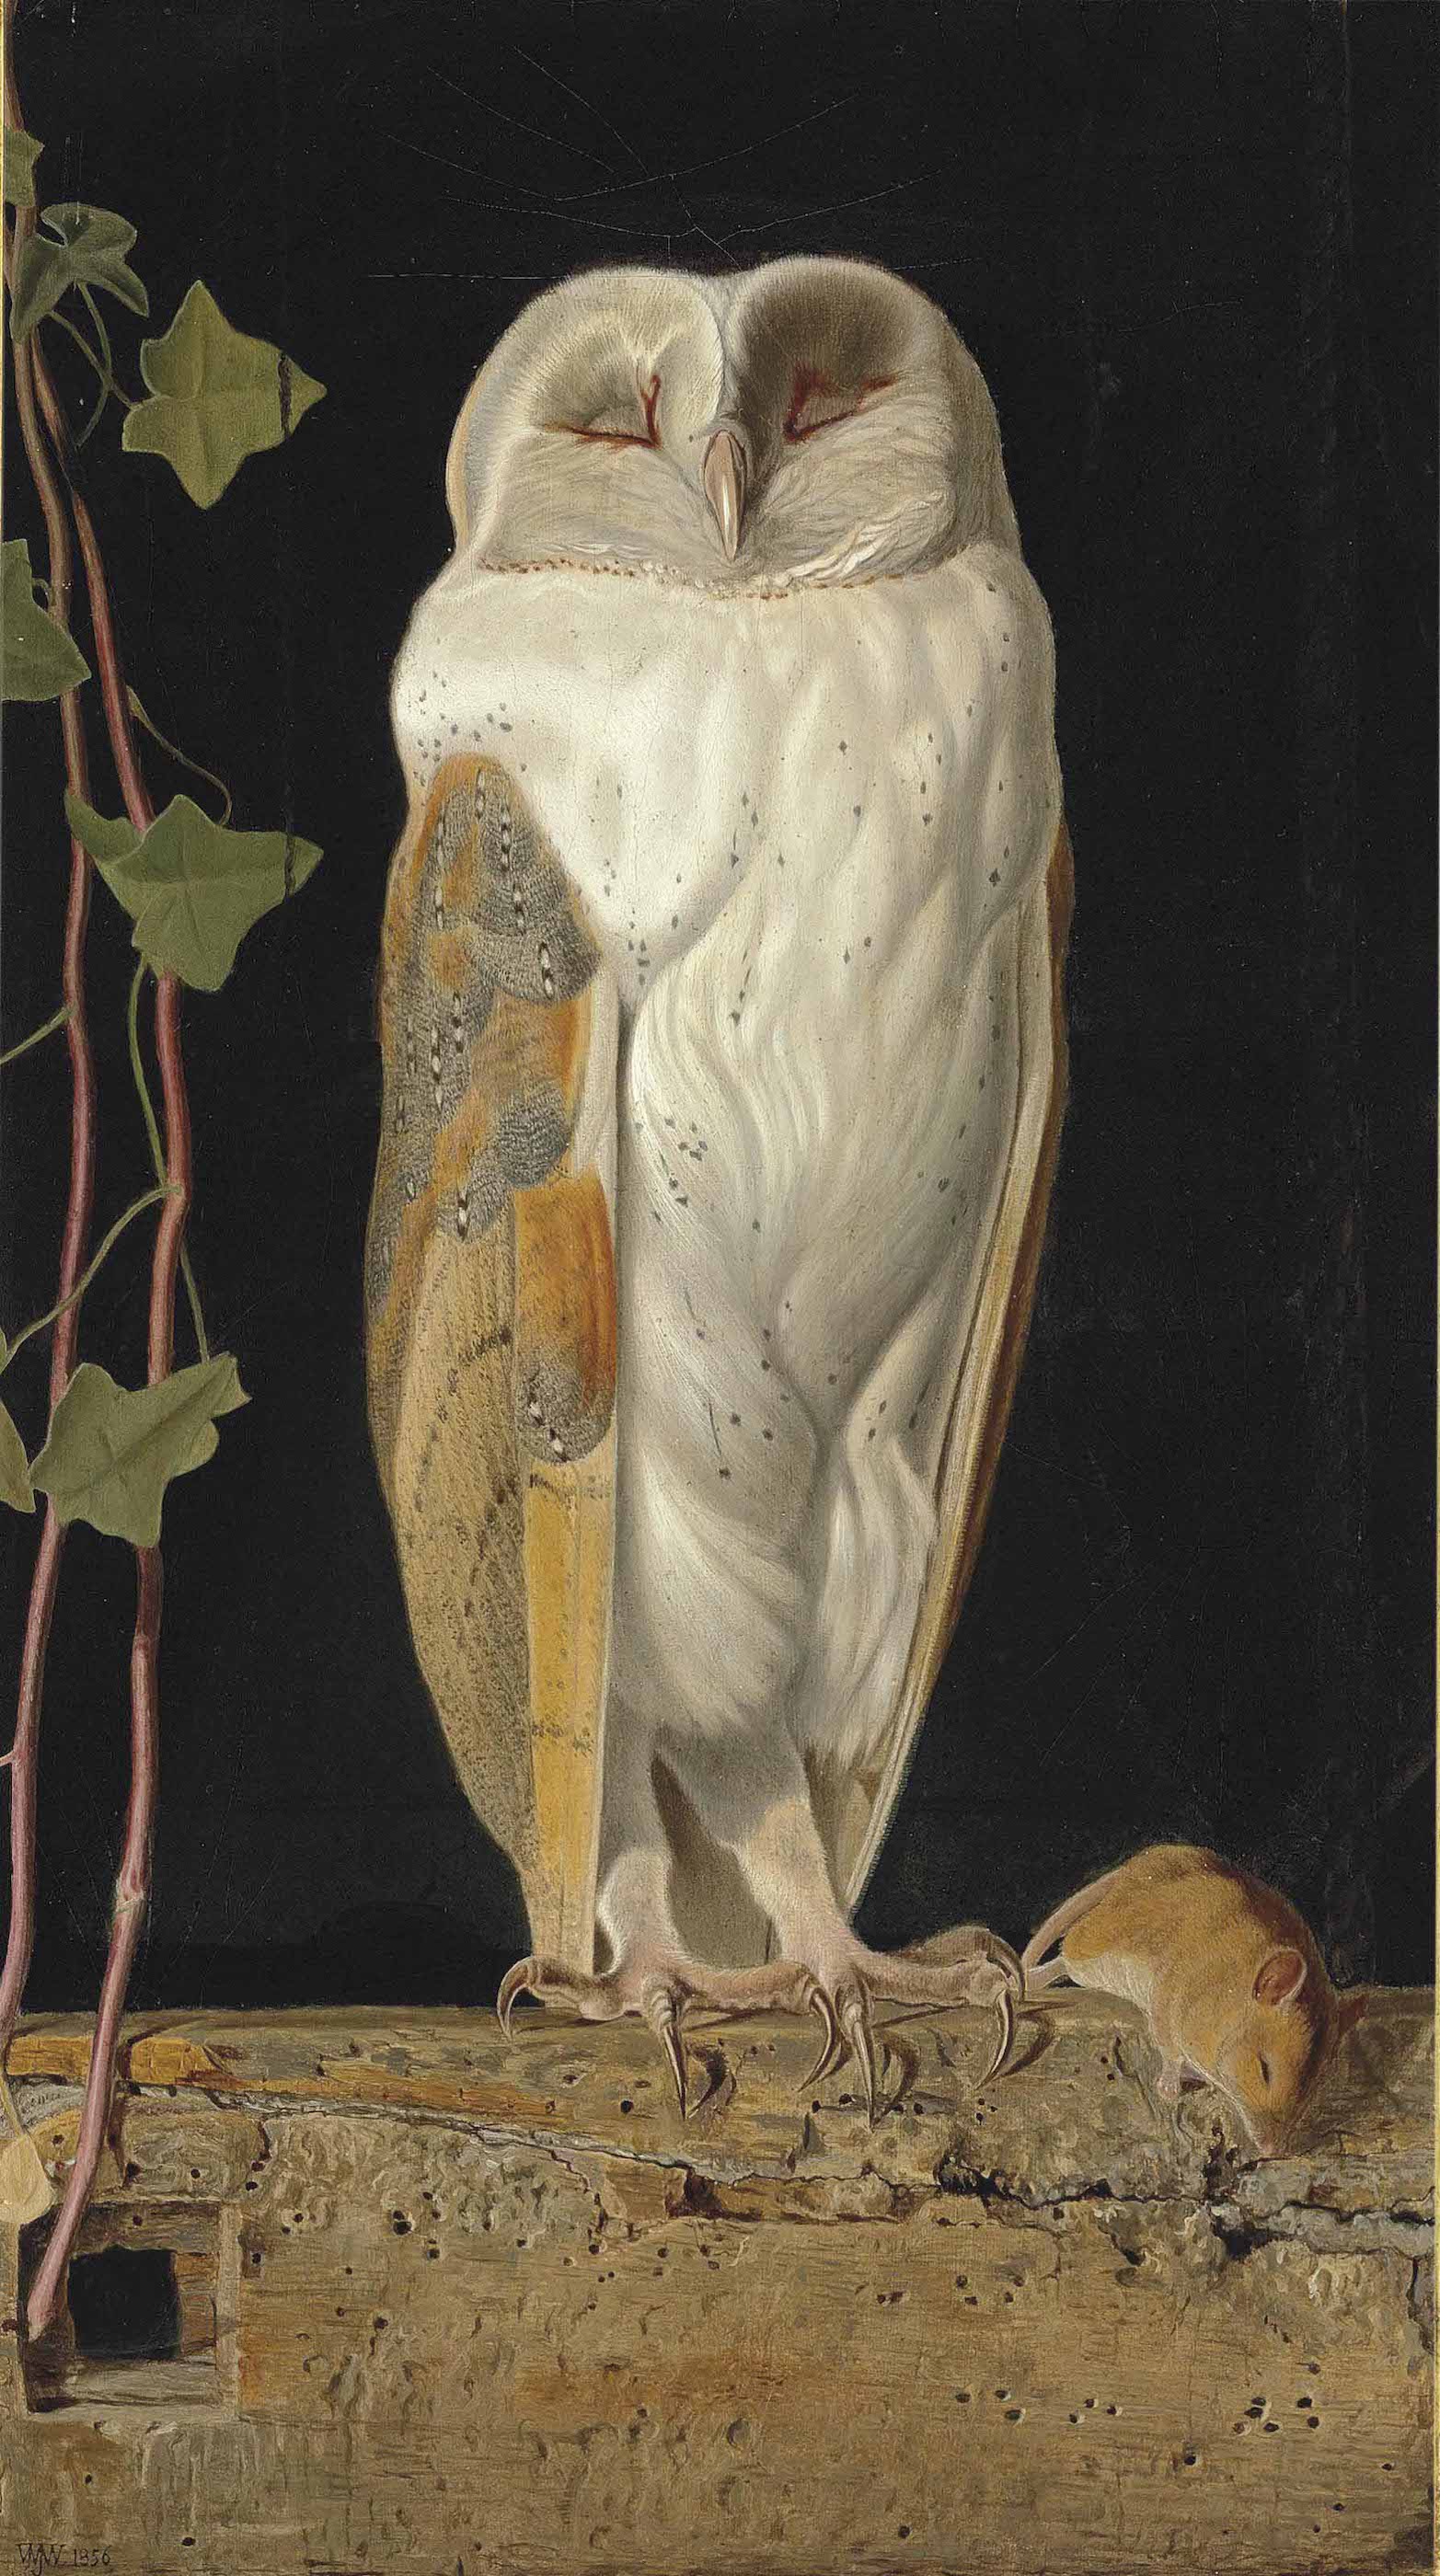 The White Owl by William James Webbe - 1856 - 45 x 26.3 cm private collection